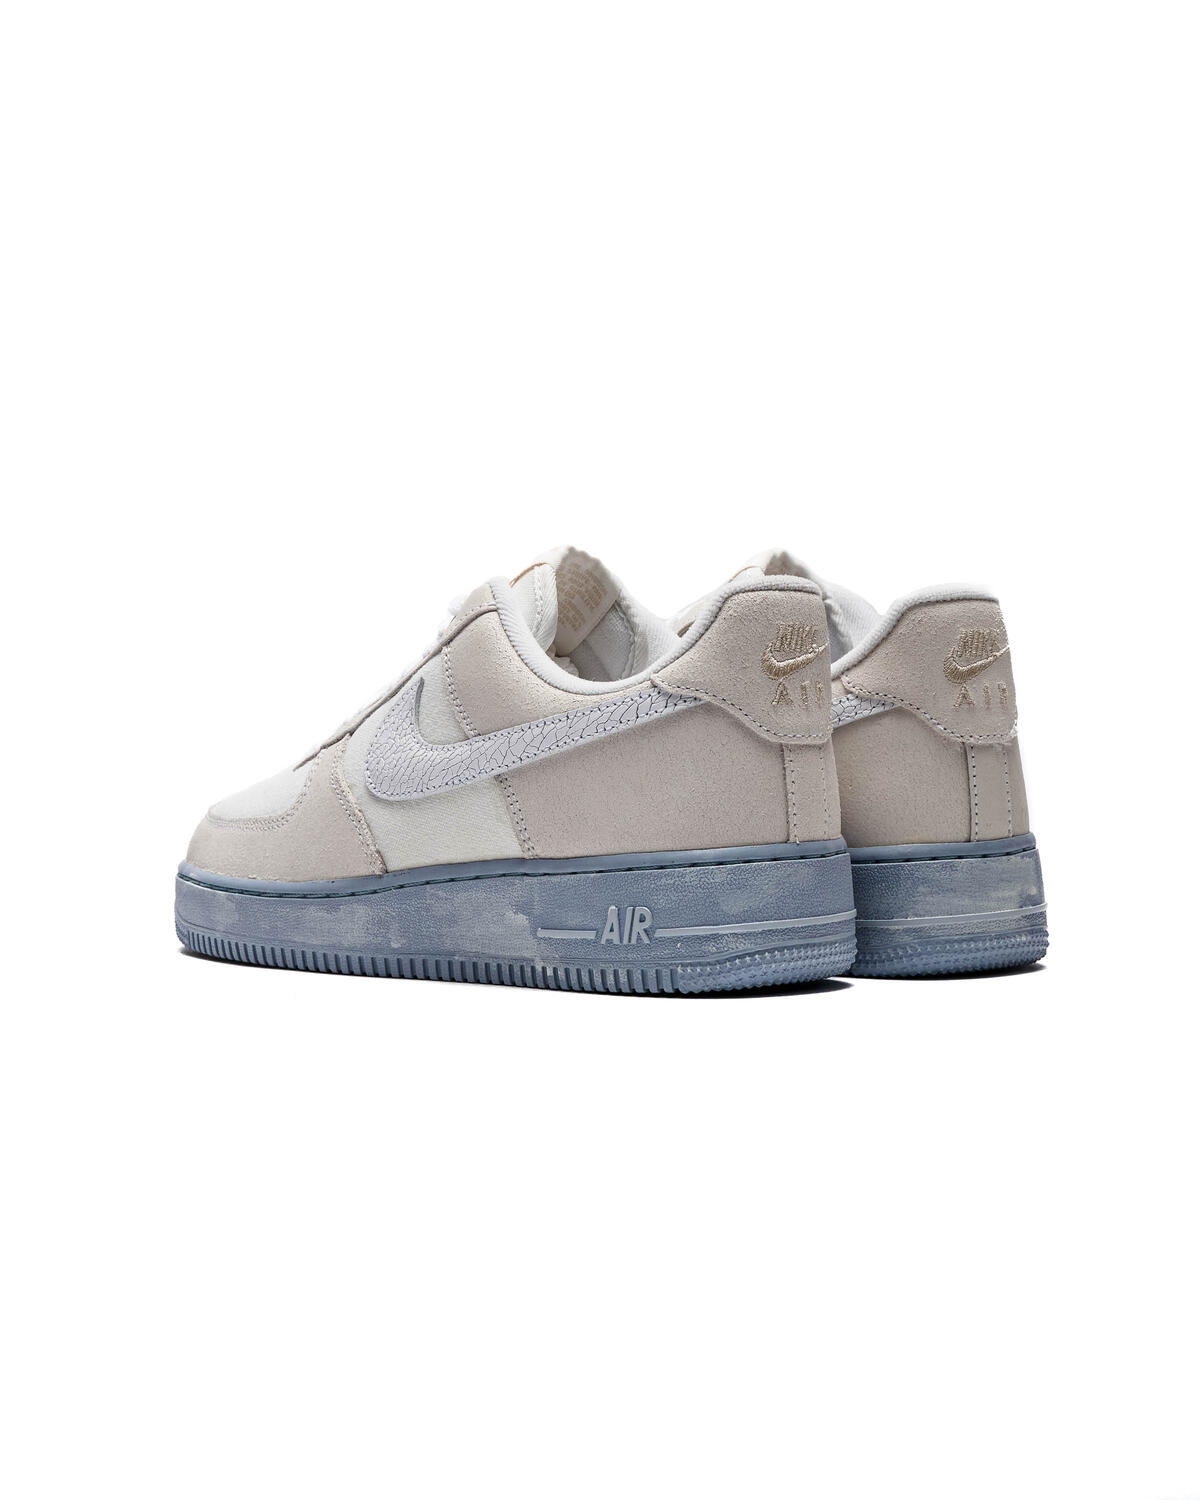 NOW ONLINE & IN-STORE (CENTRAL WORLD) Nike Air Force 1' 07 LV8 EMB “Summit  White” DV0787-100 THB 4,700 . (US) 7.5 / 8 / 9.5 / 10 / 10.5 /…